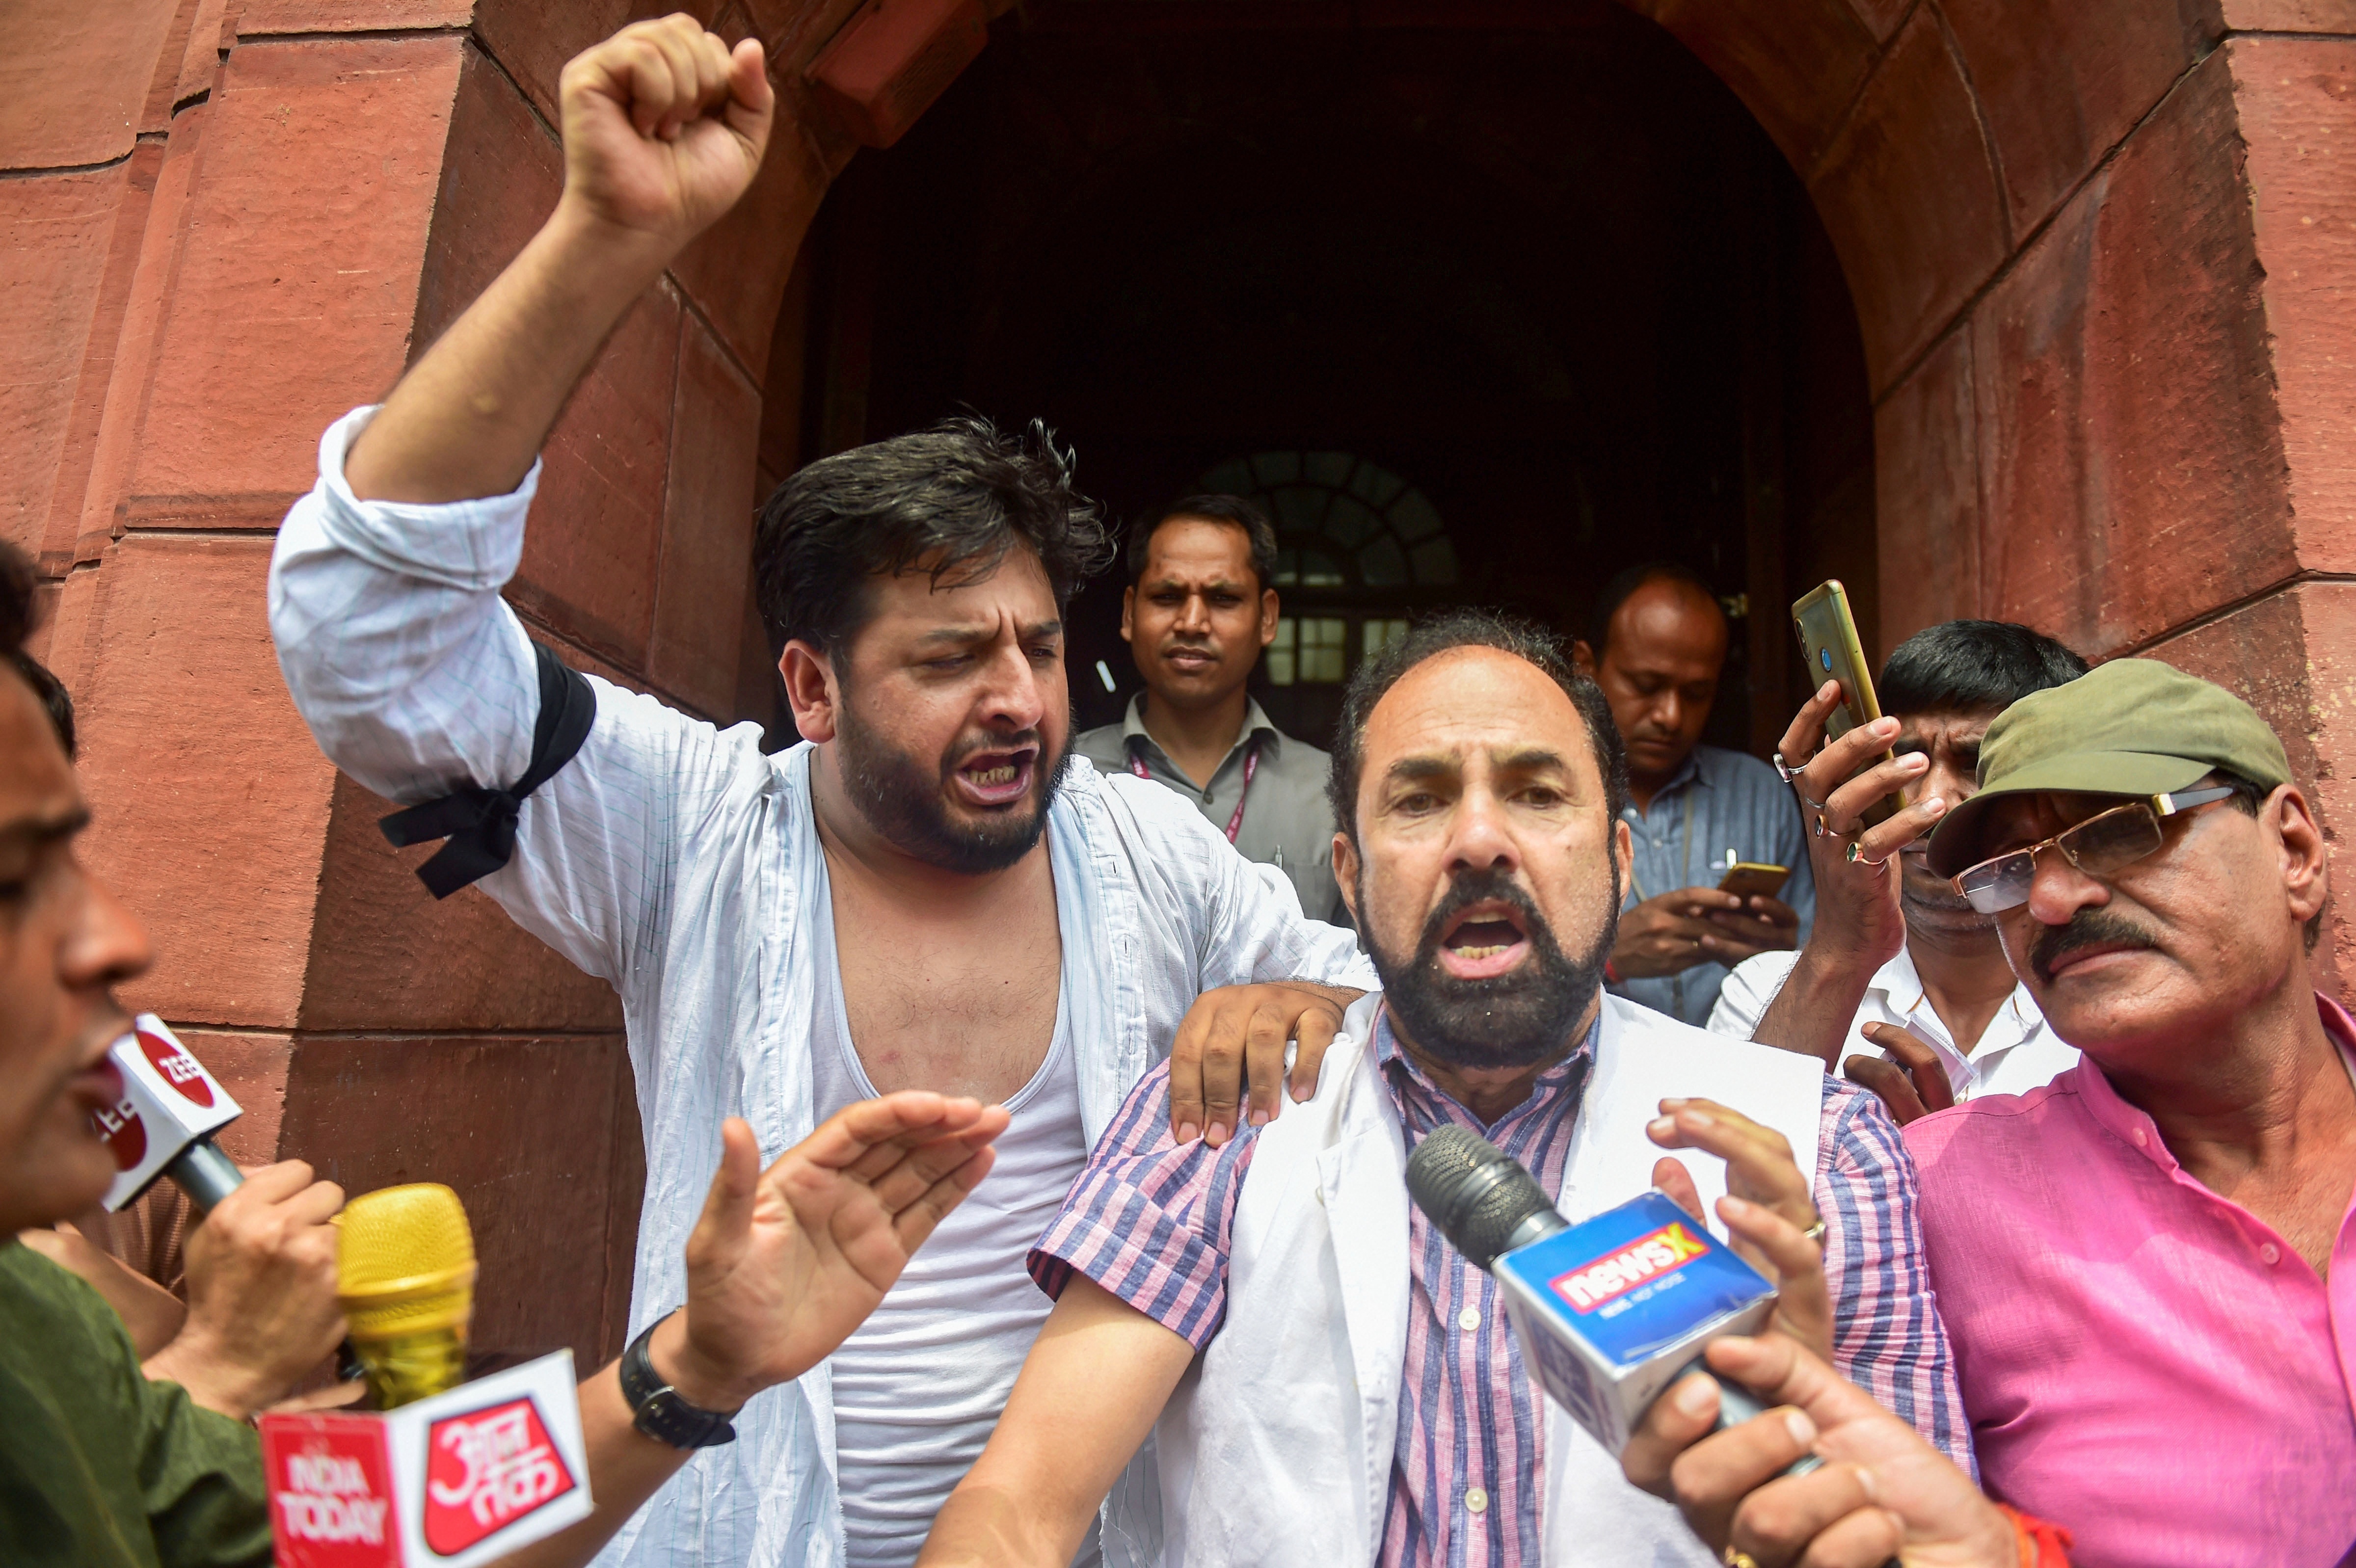 PDP MPs from Jammu and Kashmir, Fayaz Ahmad Mir and Nazir Ahmad Laway, shout slogans during a protest outside Parliament on August 5.